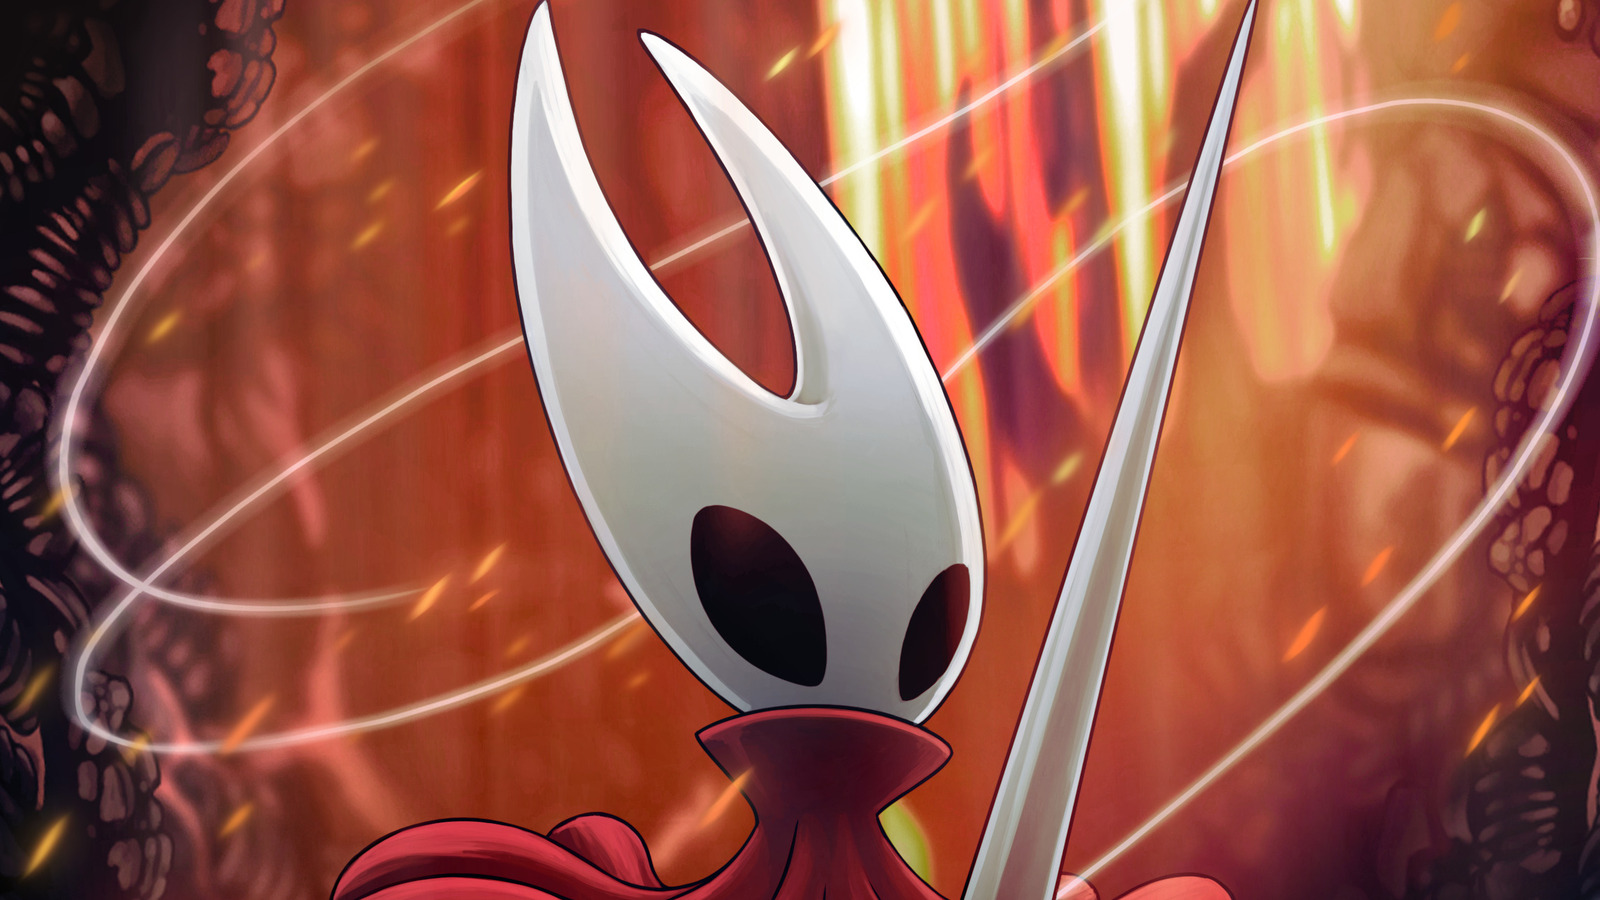 Team Cherry teases a bit more Hollow Knight: Silksong with new NPC reveal